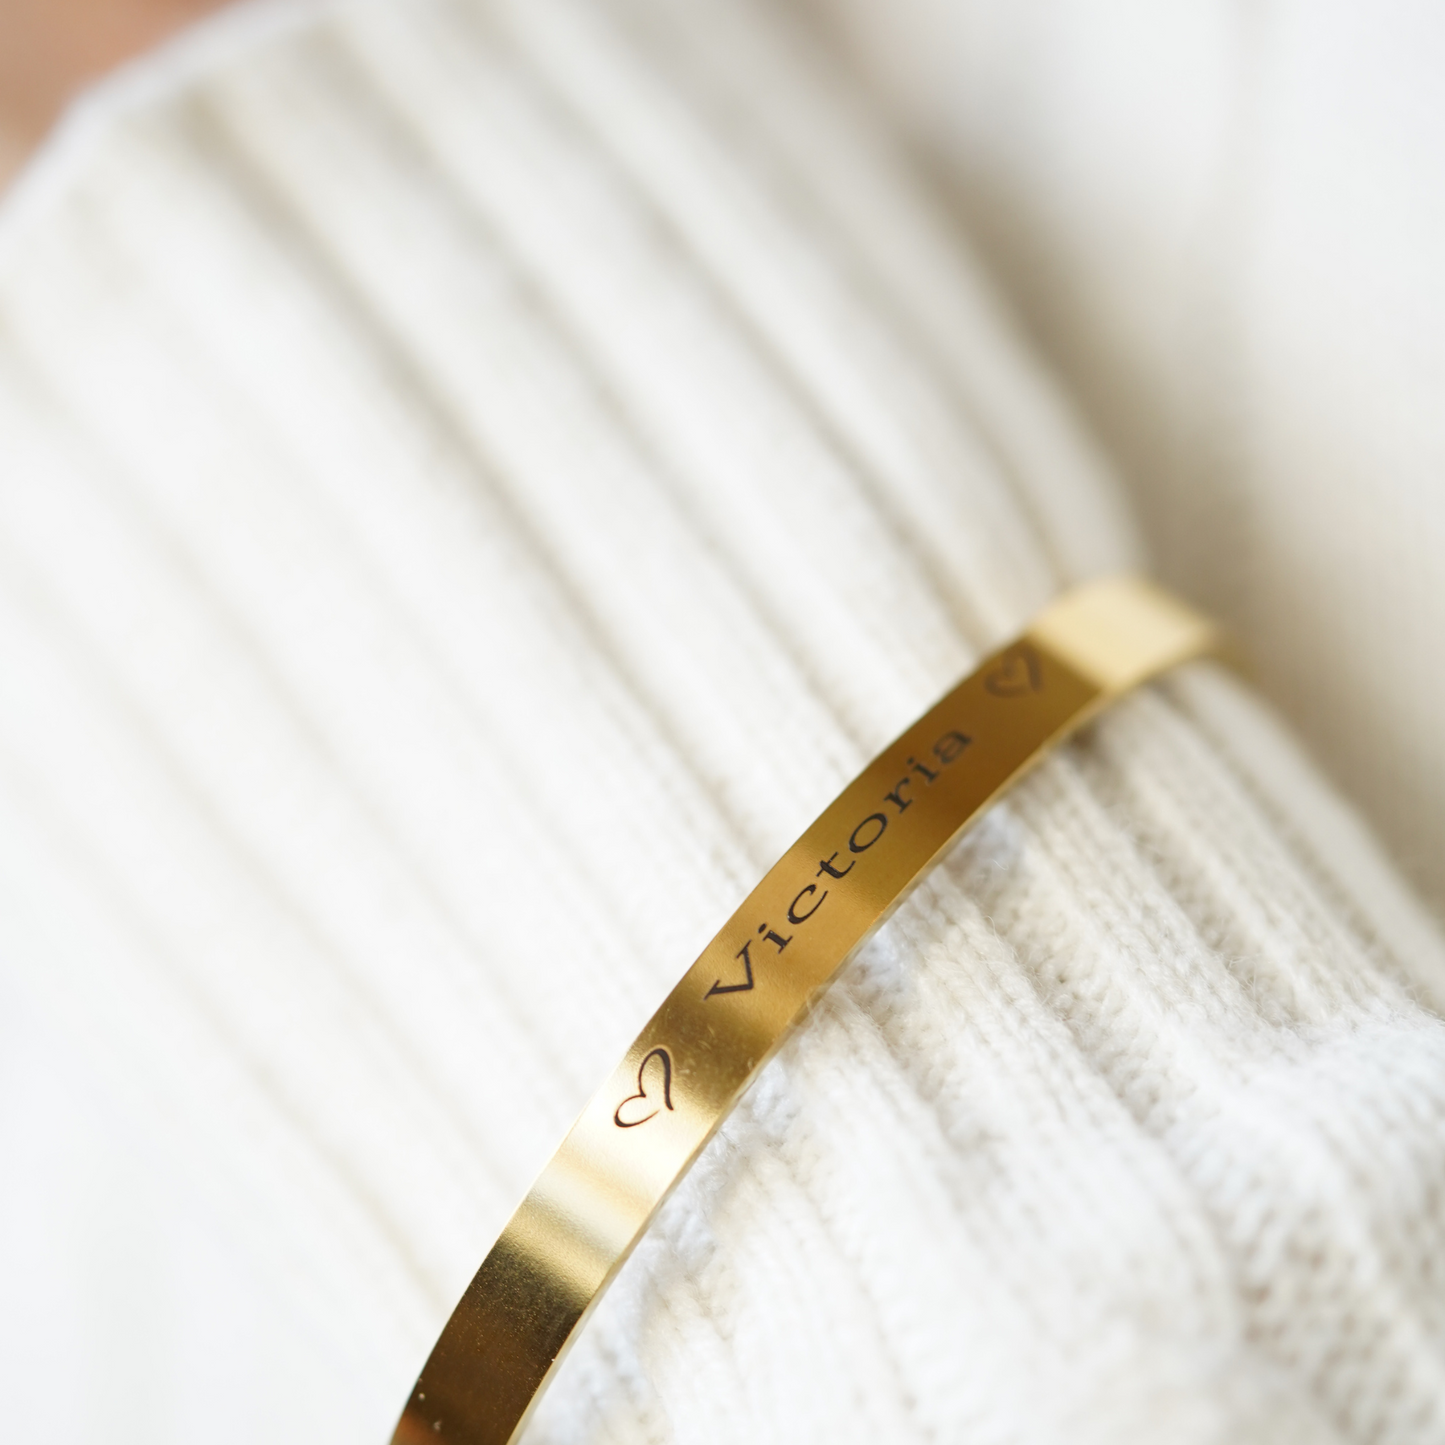 Gold Or Silver Cuff Name Bracelet for Women, Engraved Initials or Name, 18K Gold Plated Cuff Bracelet